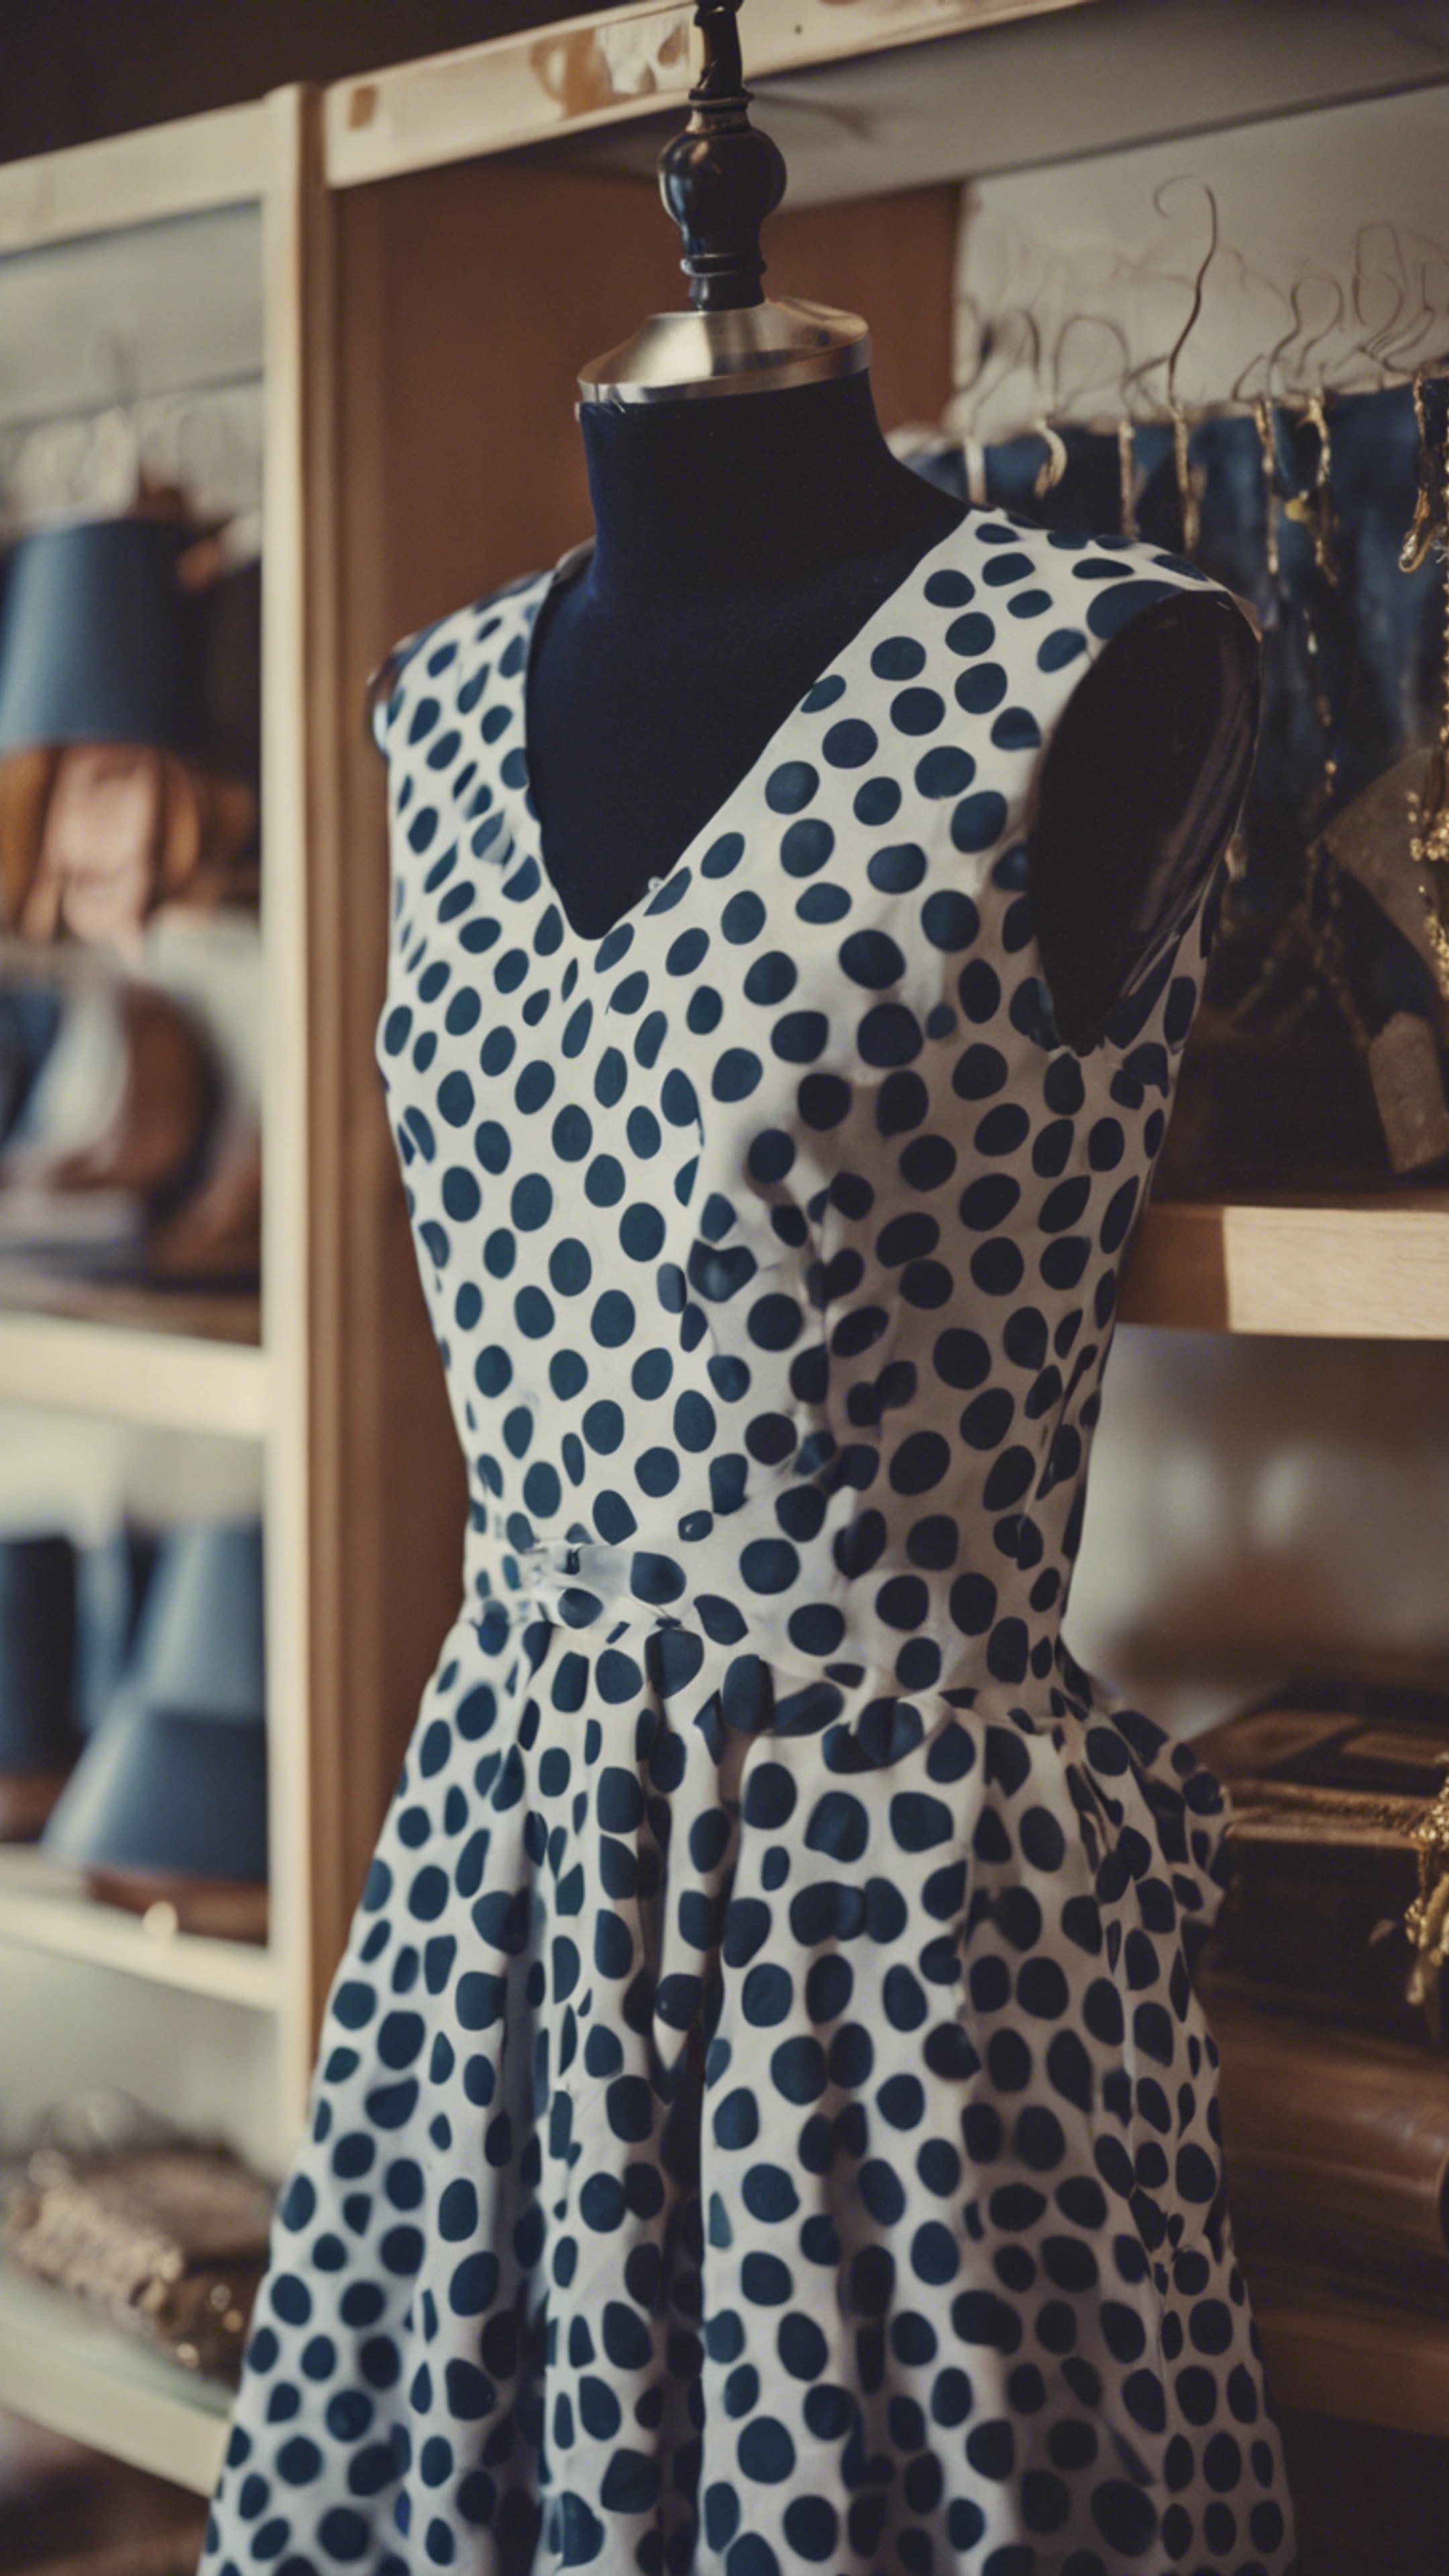 A classic 1960s navy polka dot dress hanging in a vintage boutique. ورق الجدران[089a5e0b63454d12a3db]